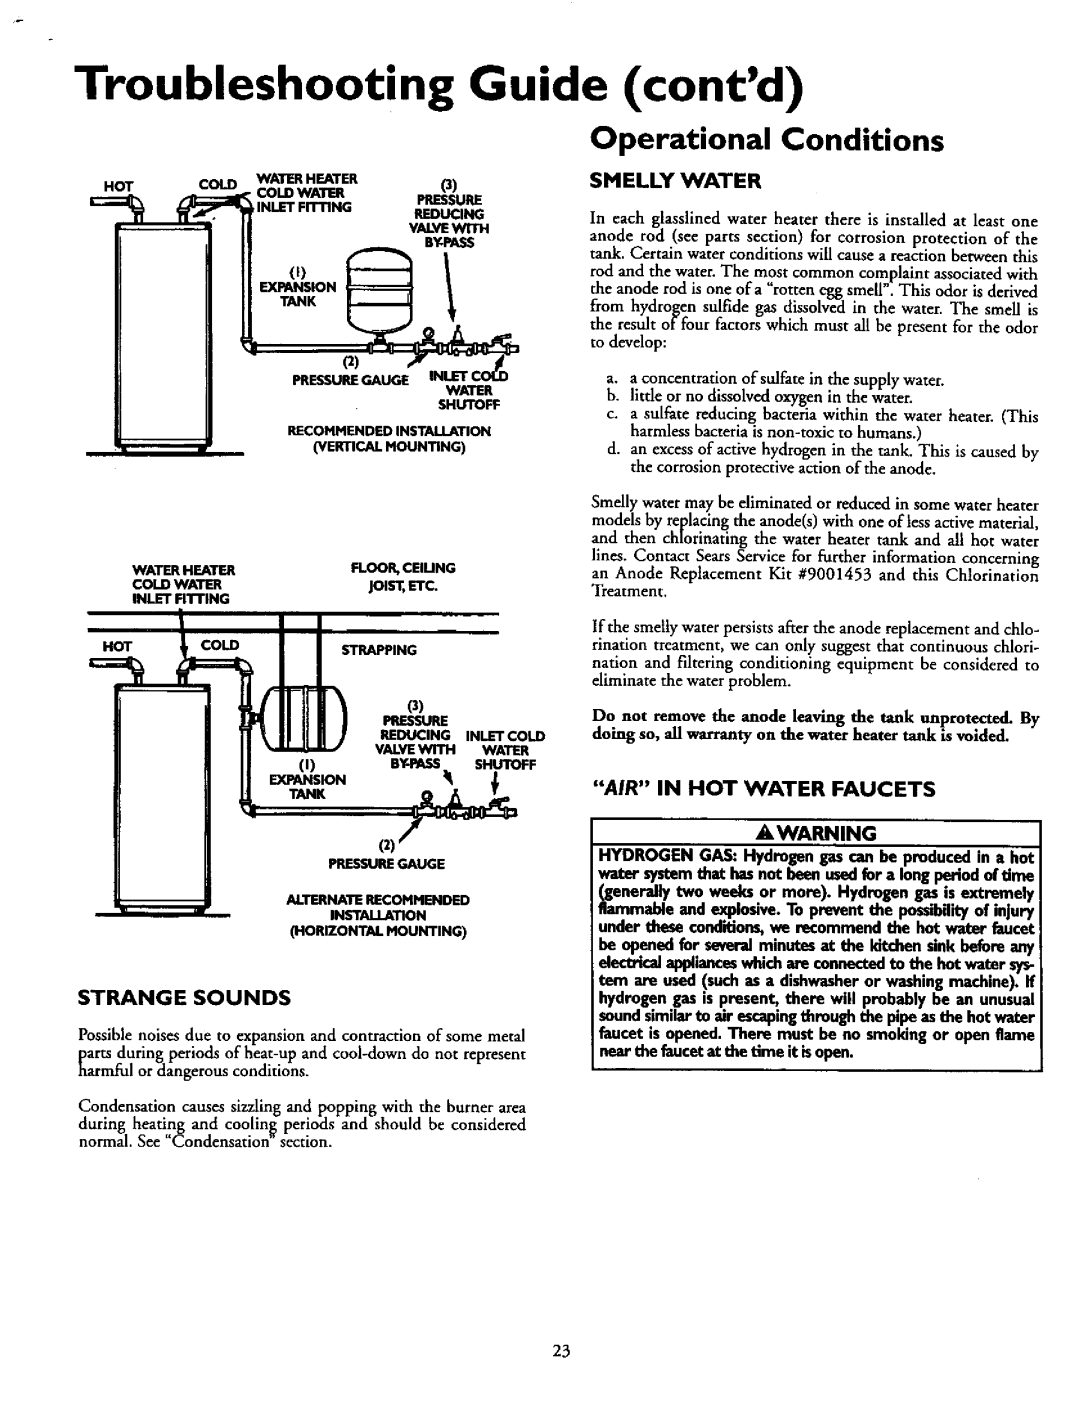 Kenmore 153.330551 Troubleshooting Guide contd, Operational Conditions, Smelly Water, Air In Hot Water Faucets, Awarning 